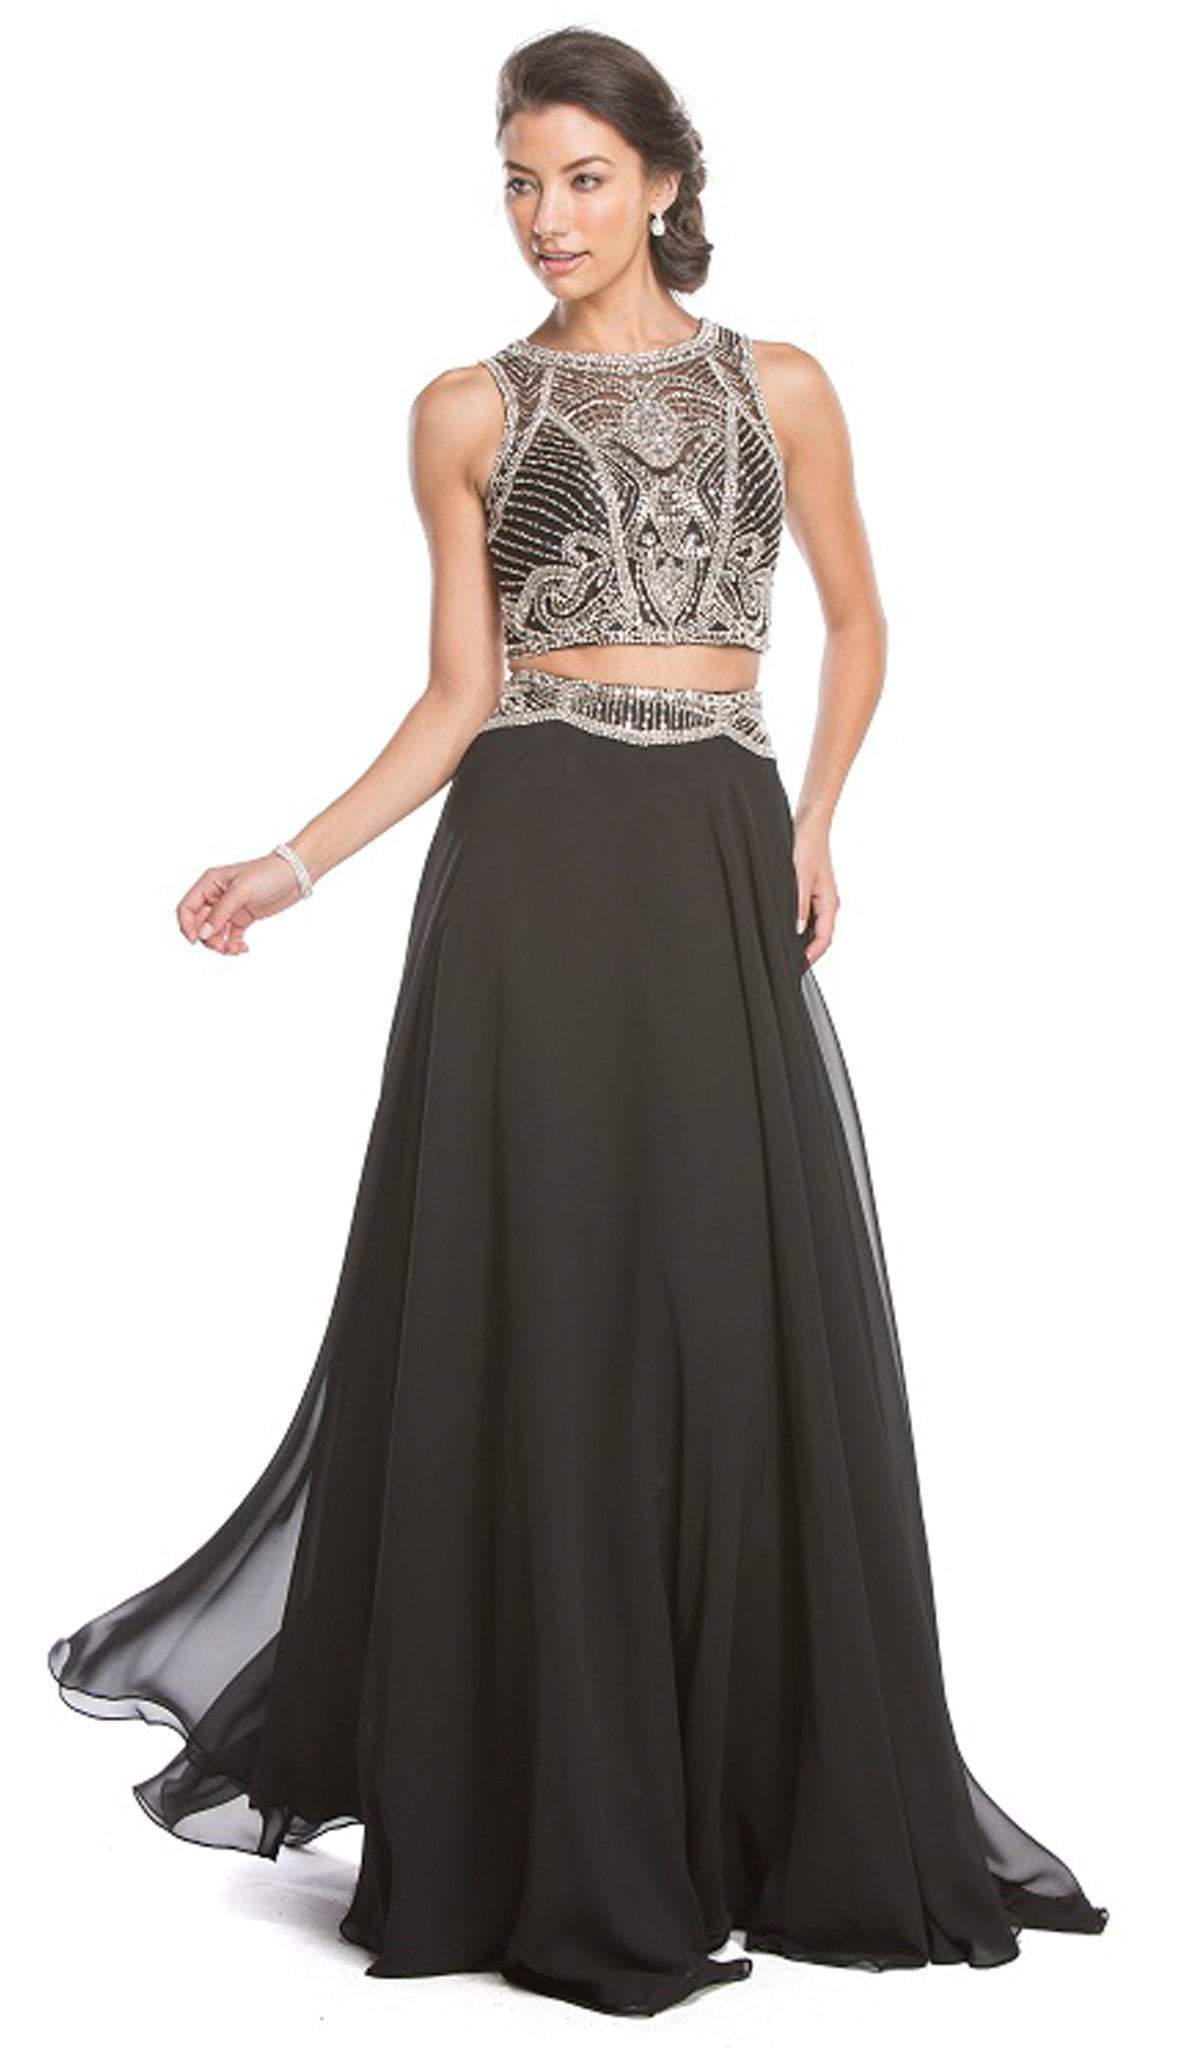 Aspeed Design - Two Piece Embellished Prom Dress
